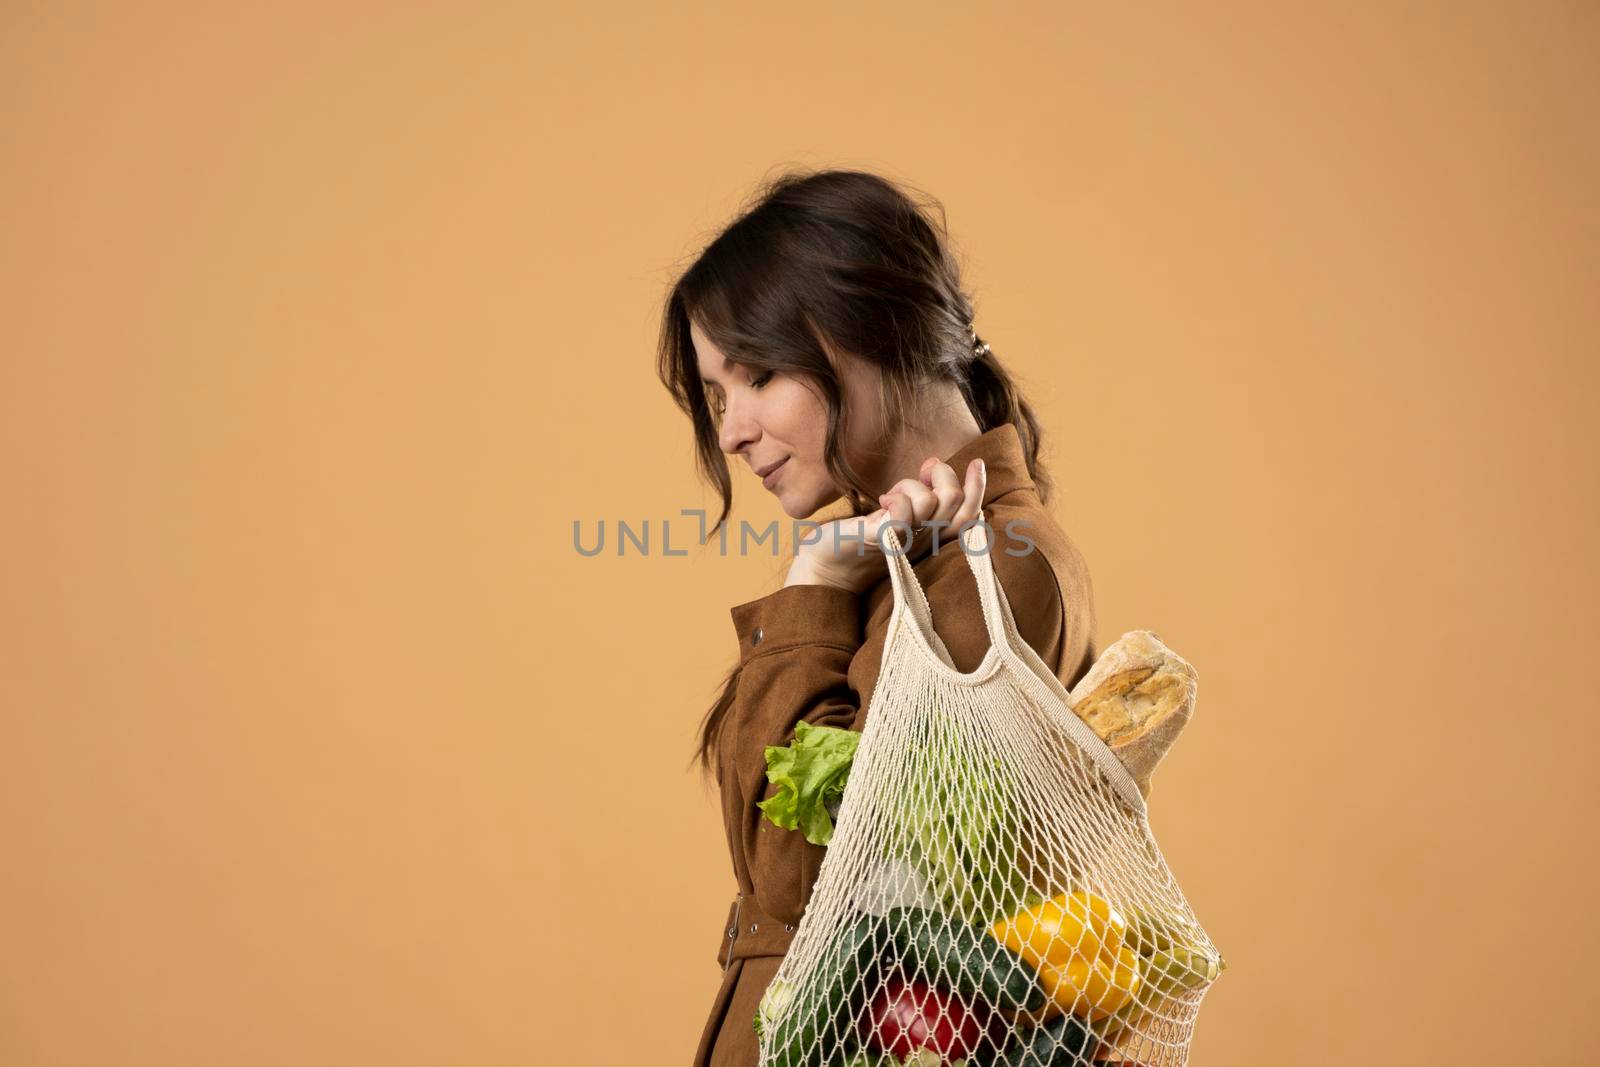 Zero waste concept. Young woman holding reusable cotton shopping mesh bag with groceries from a market. Concept of no plastic. Zero waste, plastic free. Eco friendly concept. Sustainable lifestyle